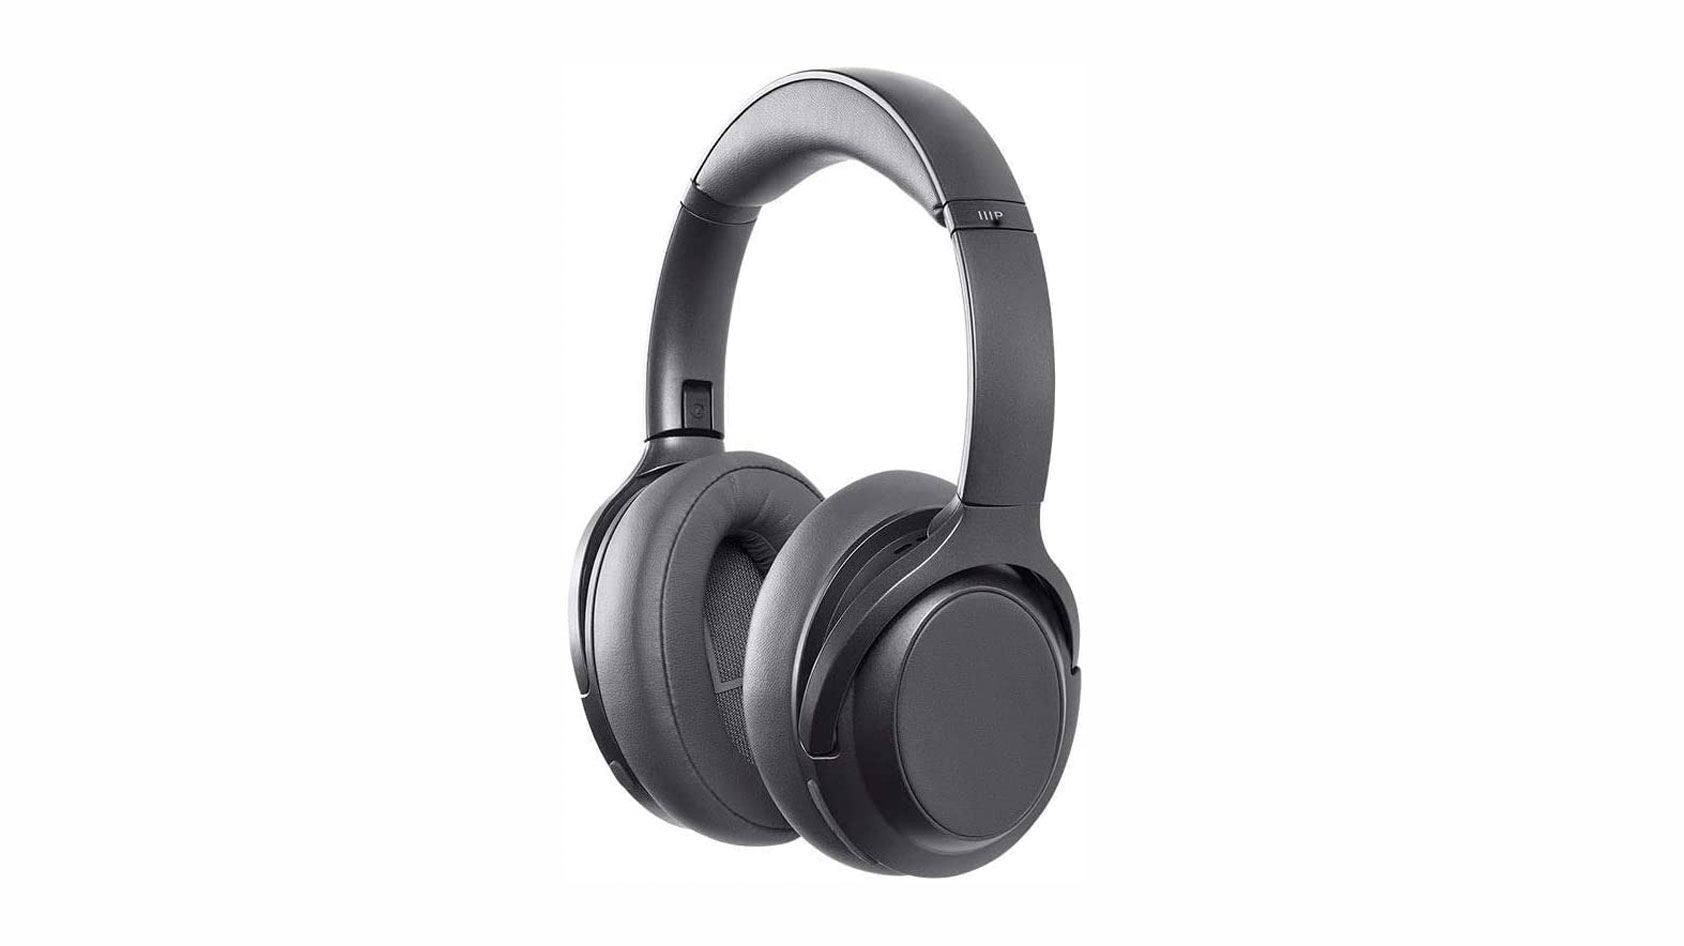 The Monorpice BT-600ANC headphones in gray against a white background.